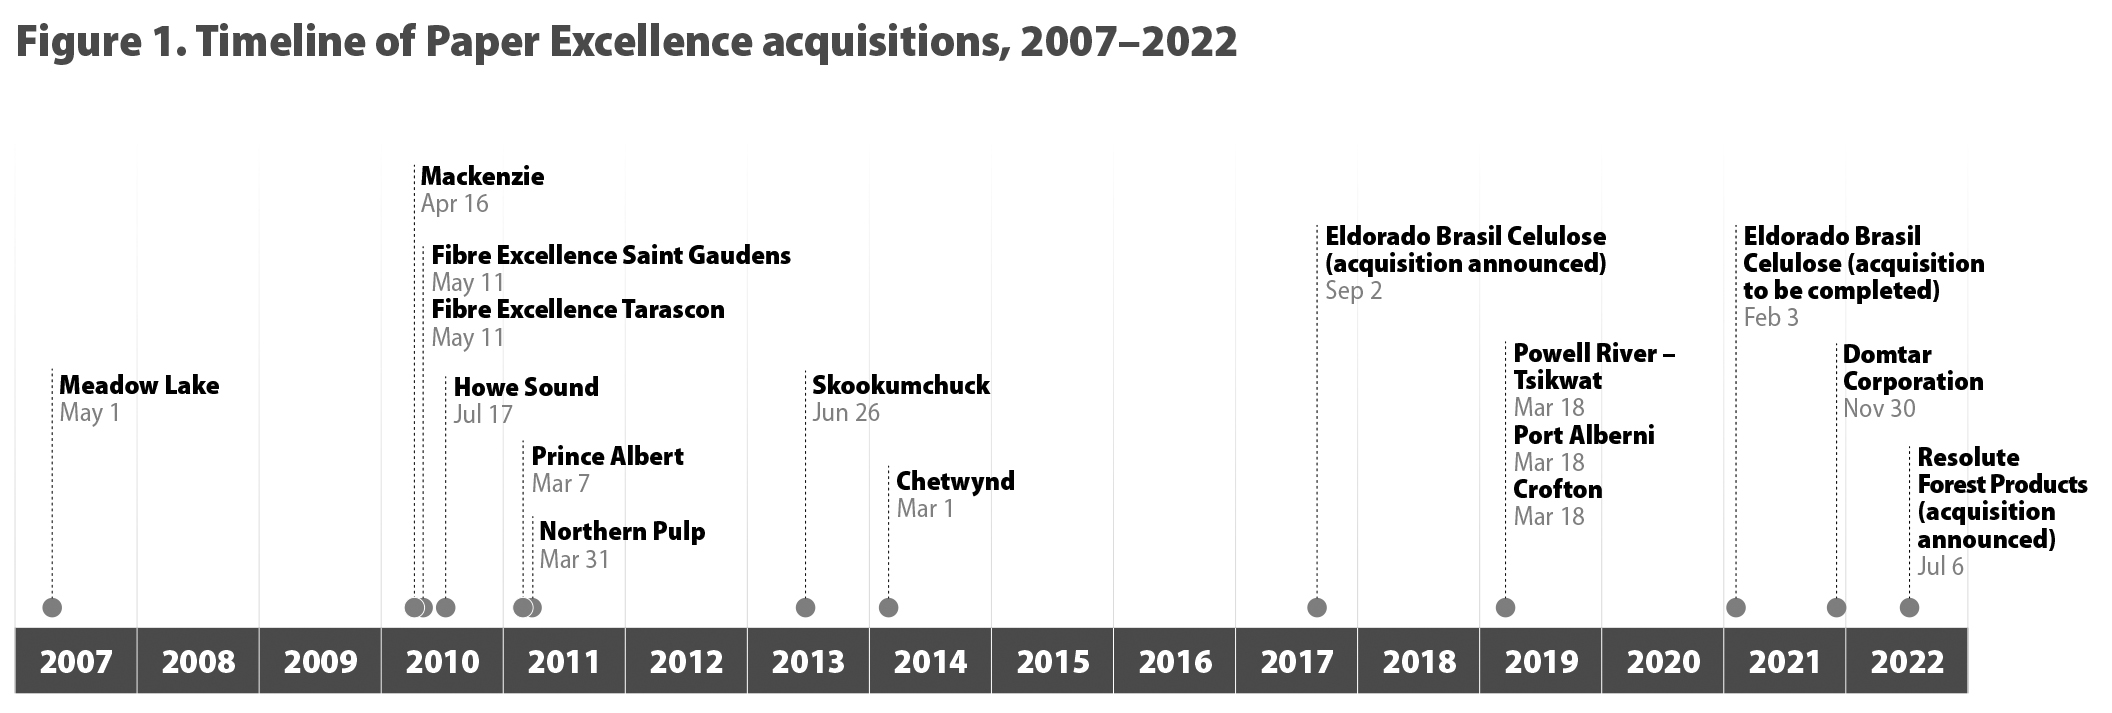 A timeline of Paper Excellence acquisitions